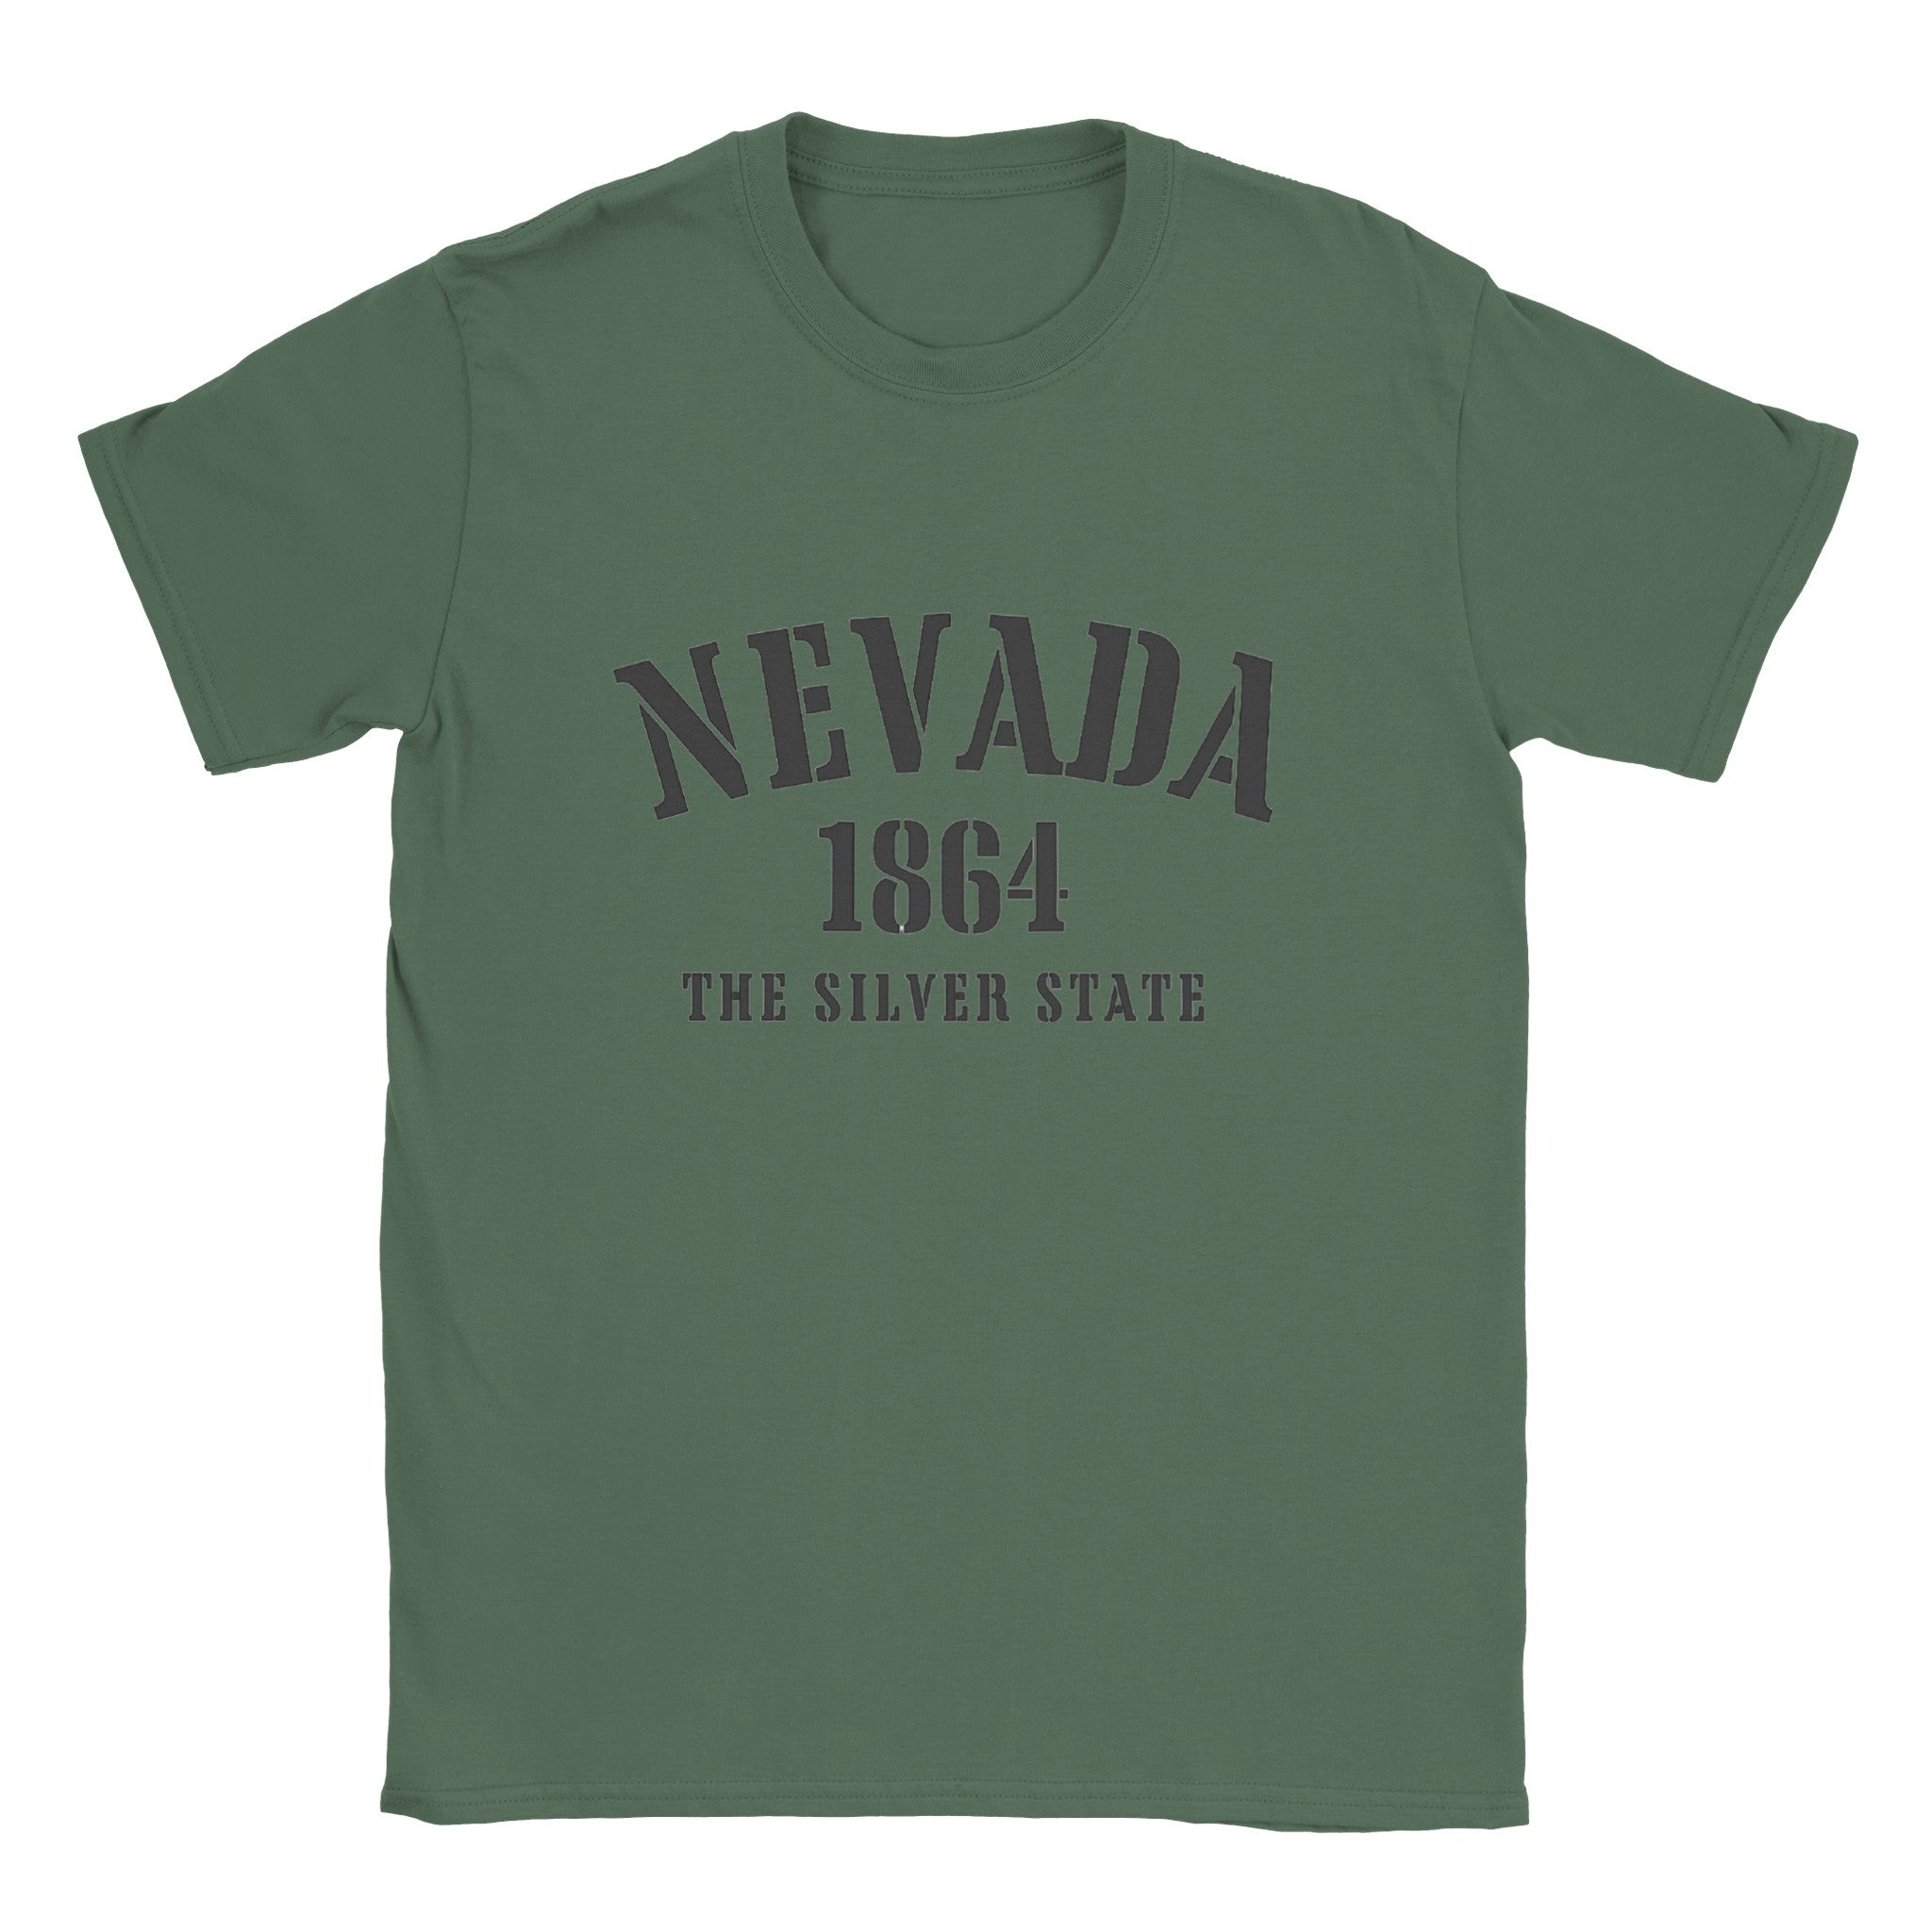 Nevada- Classic Unisex Crewneck States T-shirt - Creations by Chris and Carlos